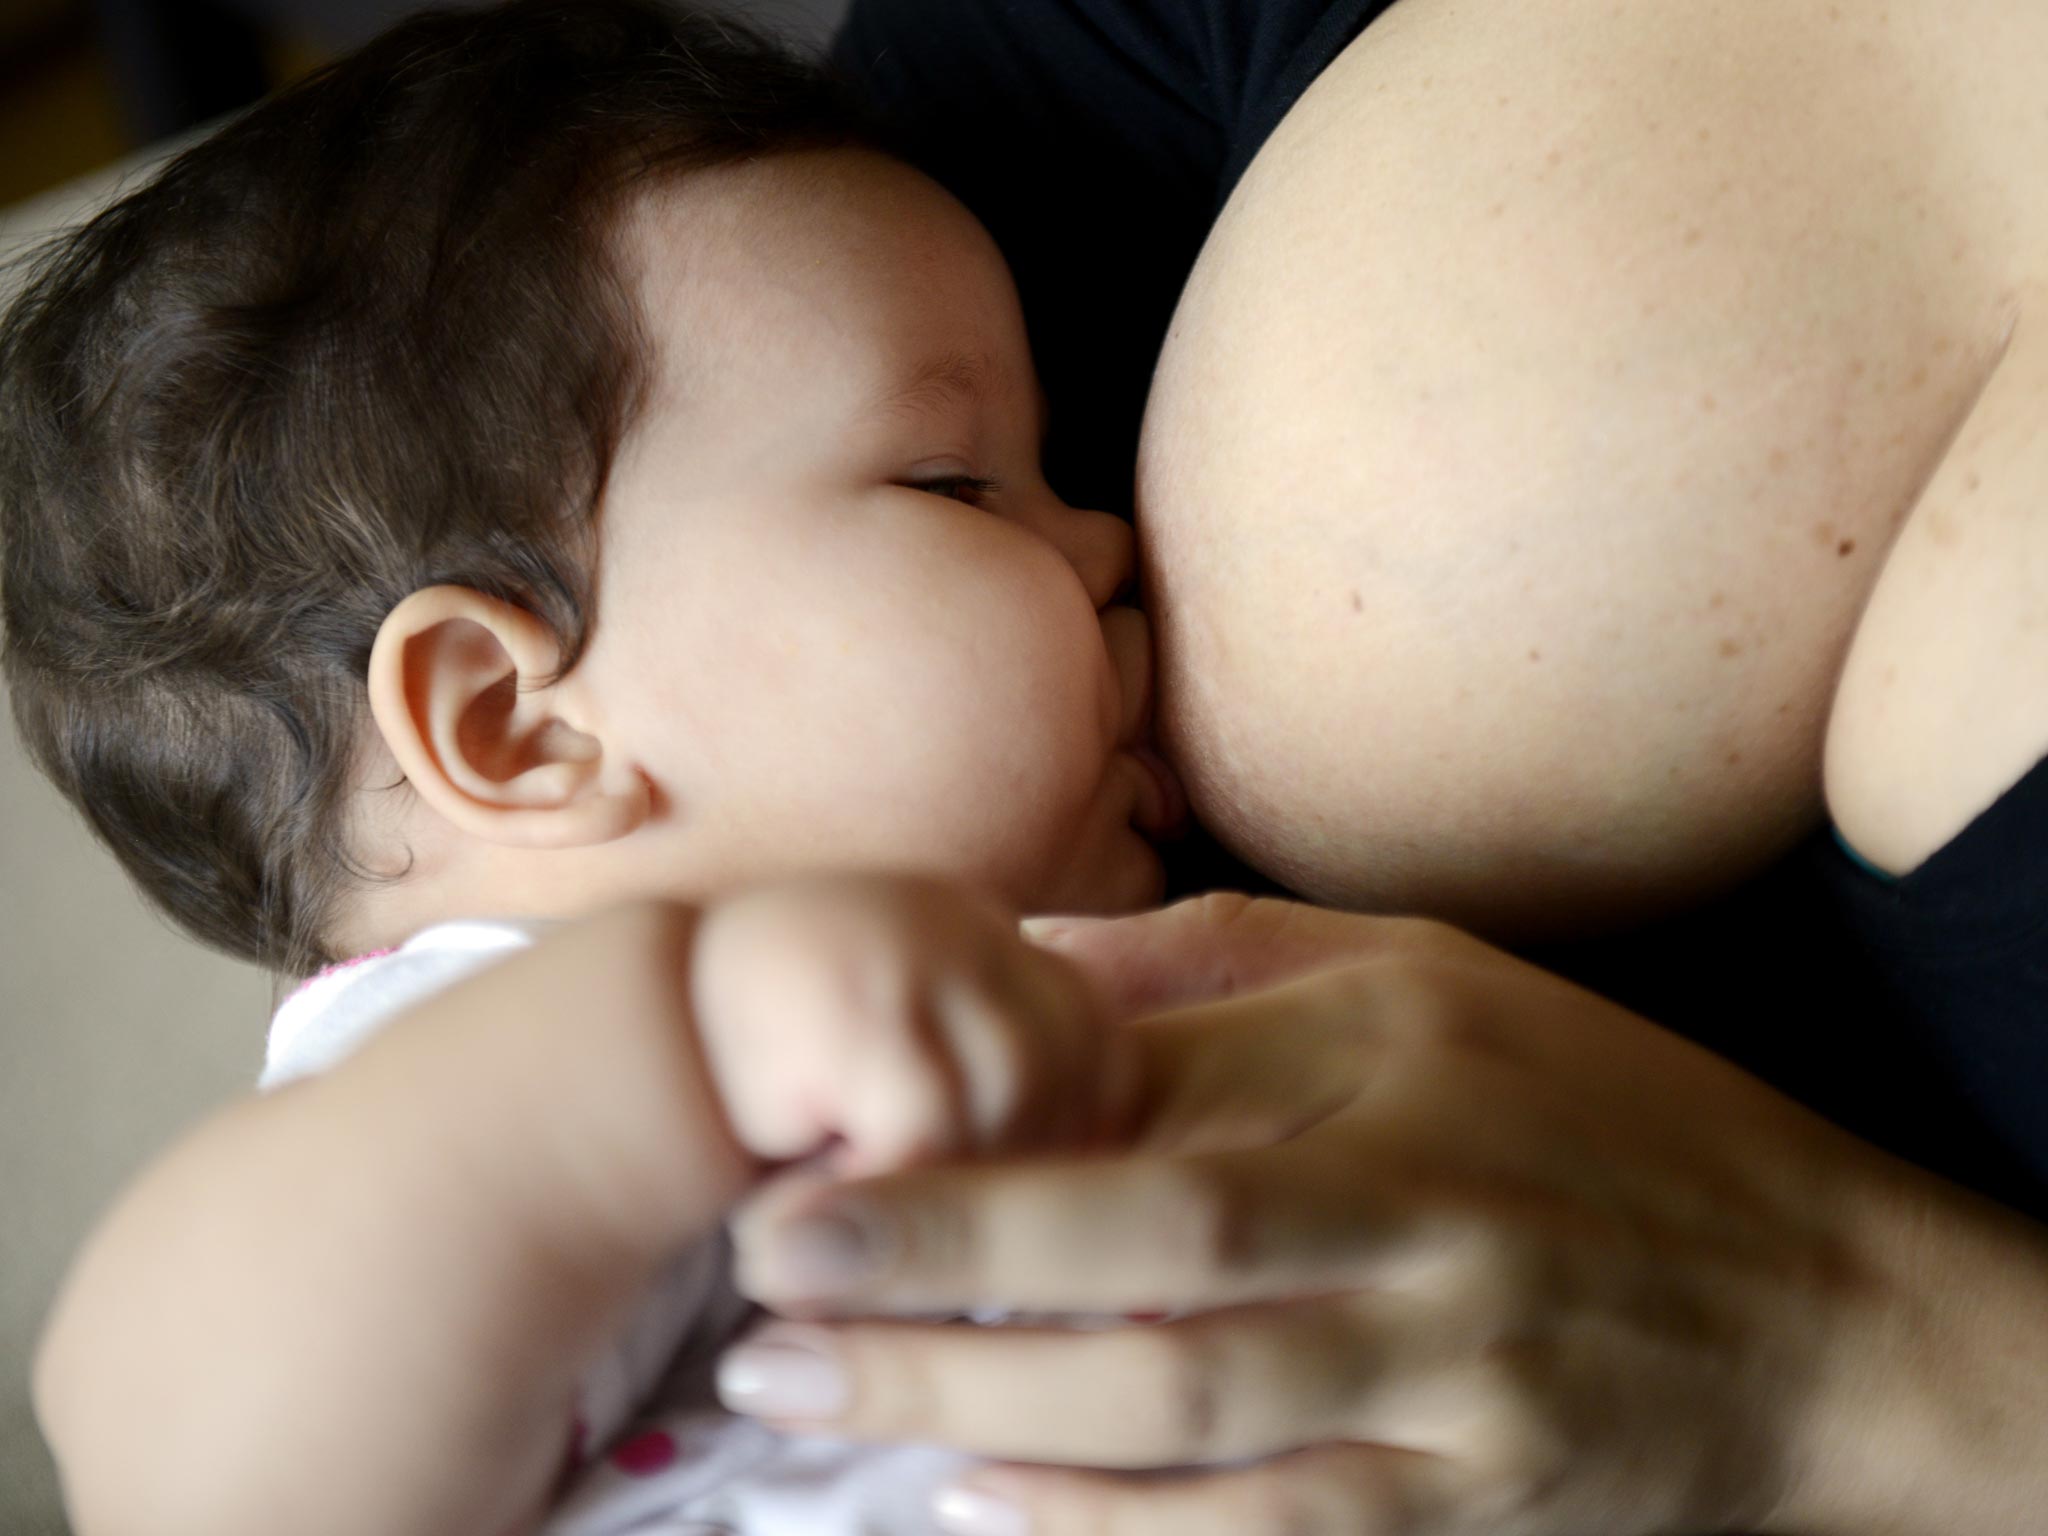 A hormone released when someone is under stress or pressure has been found in breast milk